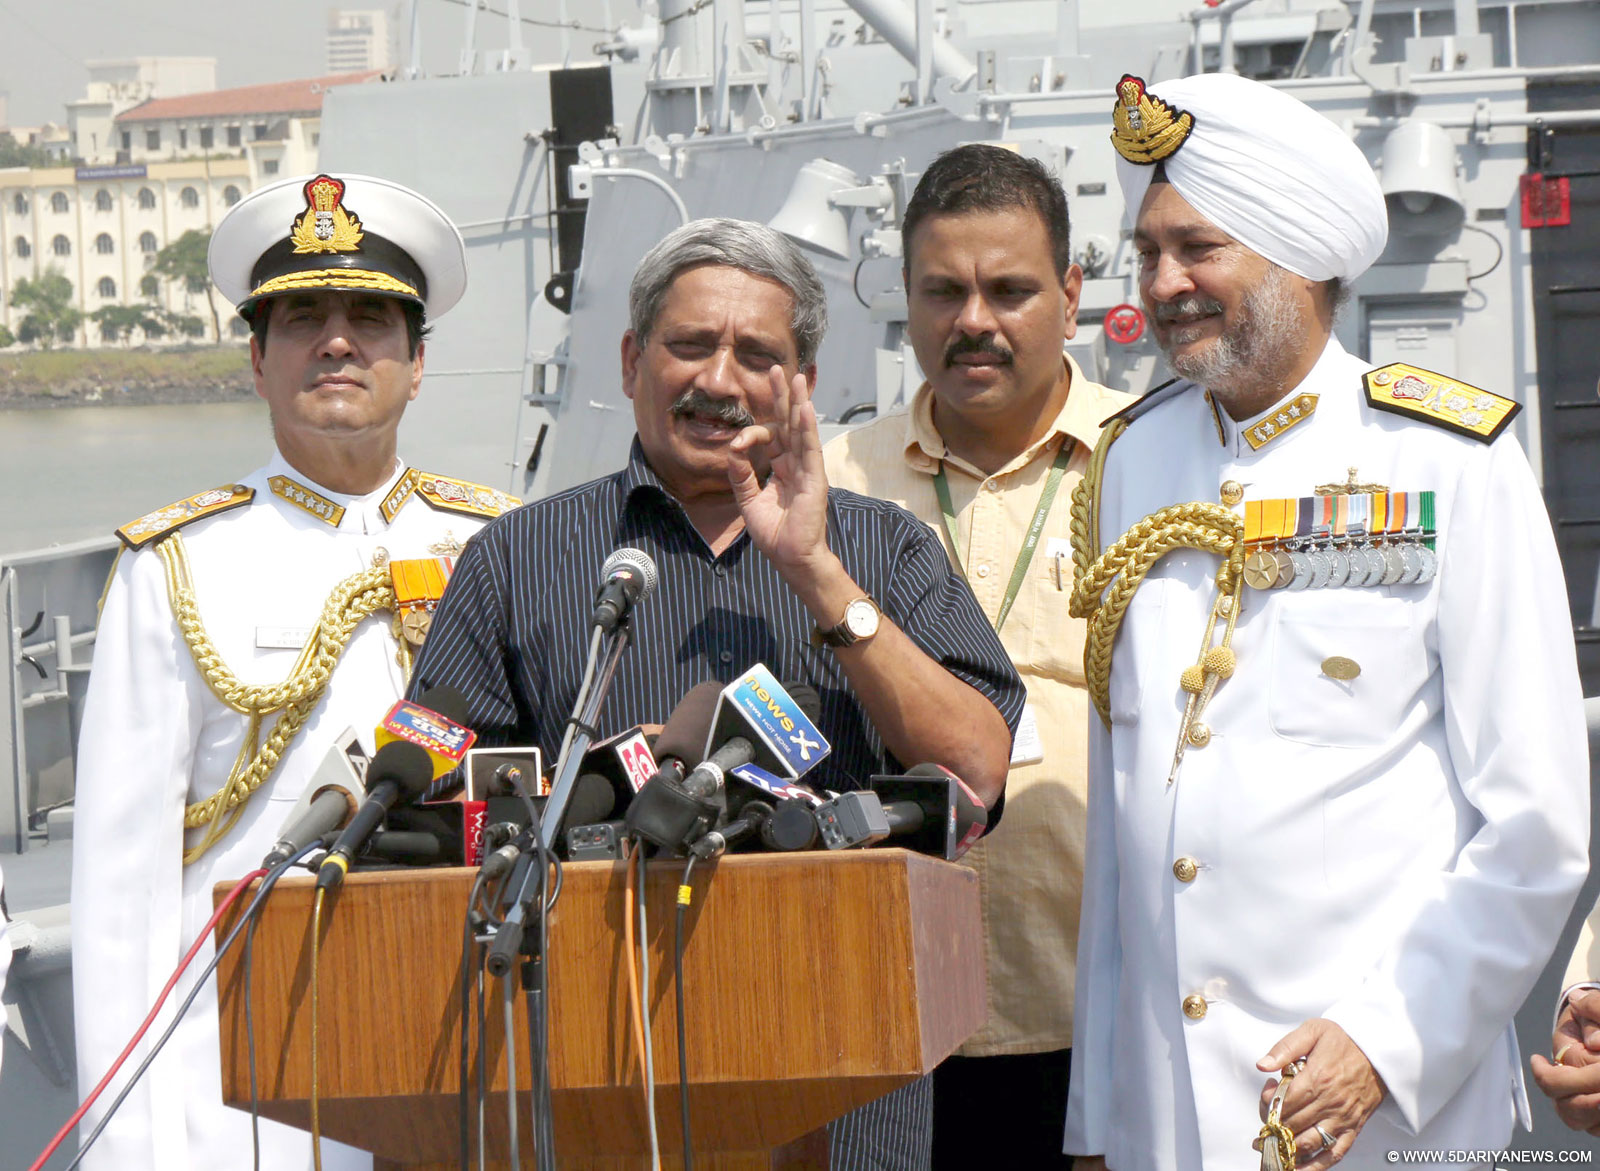 The Union Minister for Defence, Shri Manohar Parrikar commissioning the INS Kochi , at Naval Dockyard, in Mumbai on September 30, 2015. The Chief of Naval Staff, Admiral R.K. Dhowan and other dignitaries are also seen.